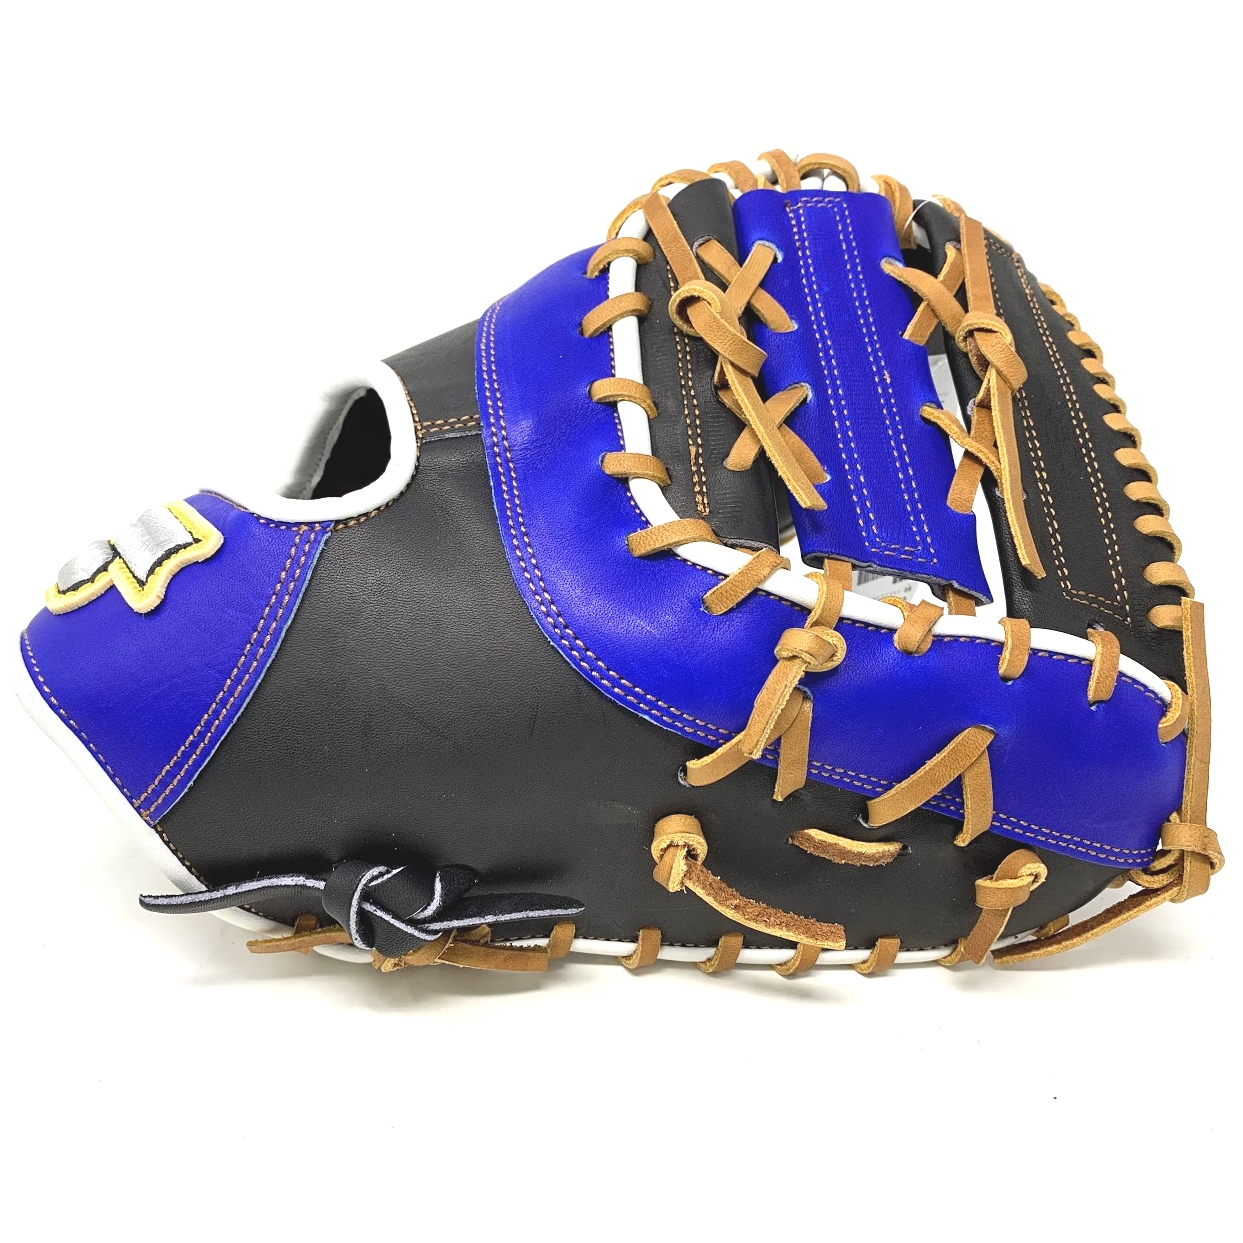 ssk-taiwan-silver-series-13-inch-baseball-first-base-mitt-black-royal-right-hand-throw DWGF4721-BKRY-RightHandThrow SSK  <p><span>The SSK Taiwan Silver Series is made for players who had